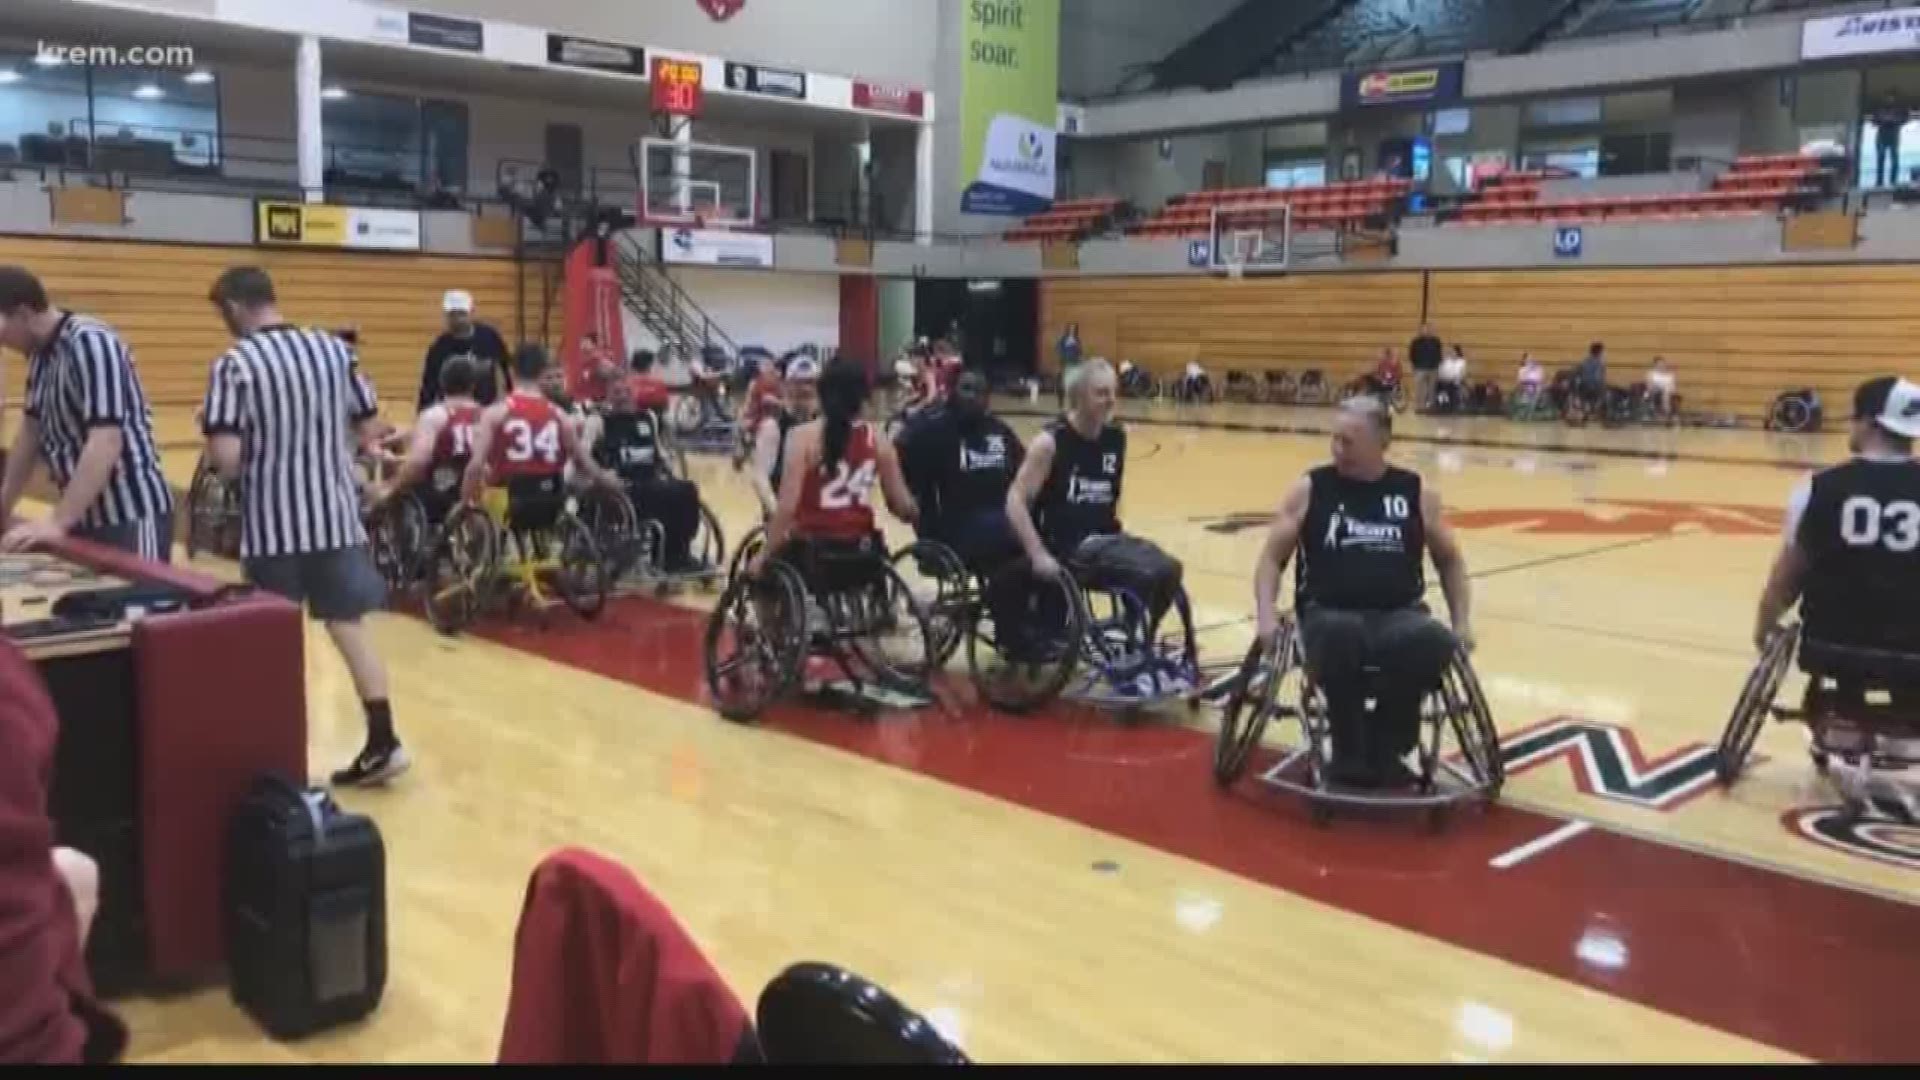 The wheelchair basketball team could be the first of its kind on the West Coast.